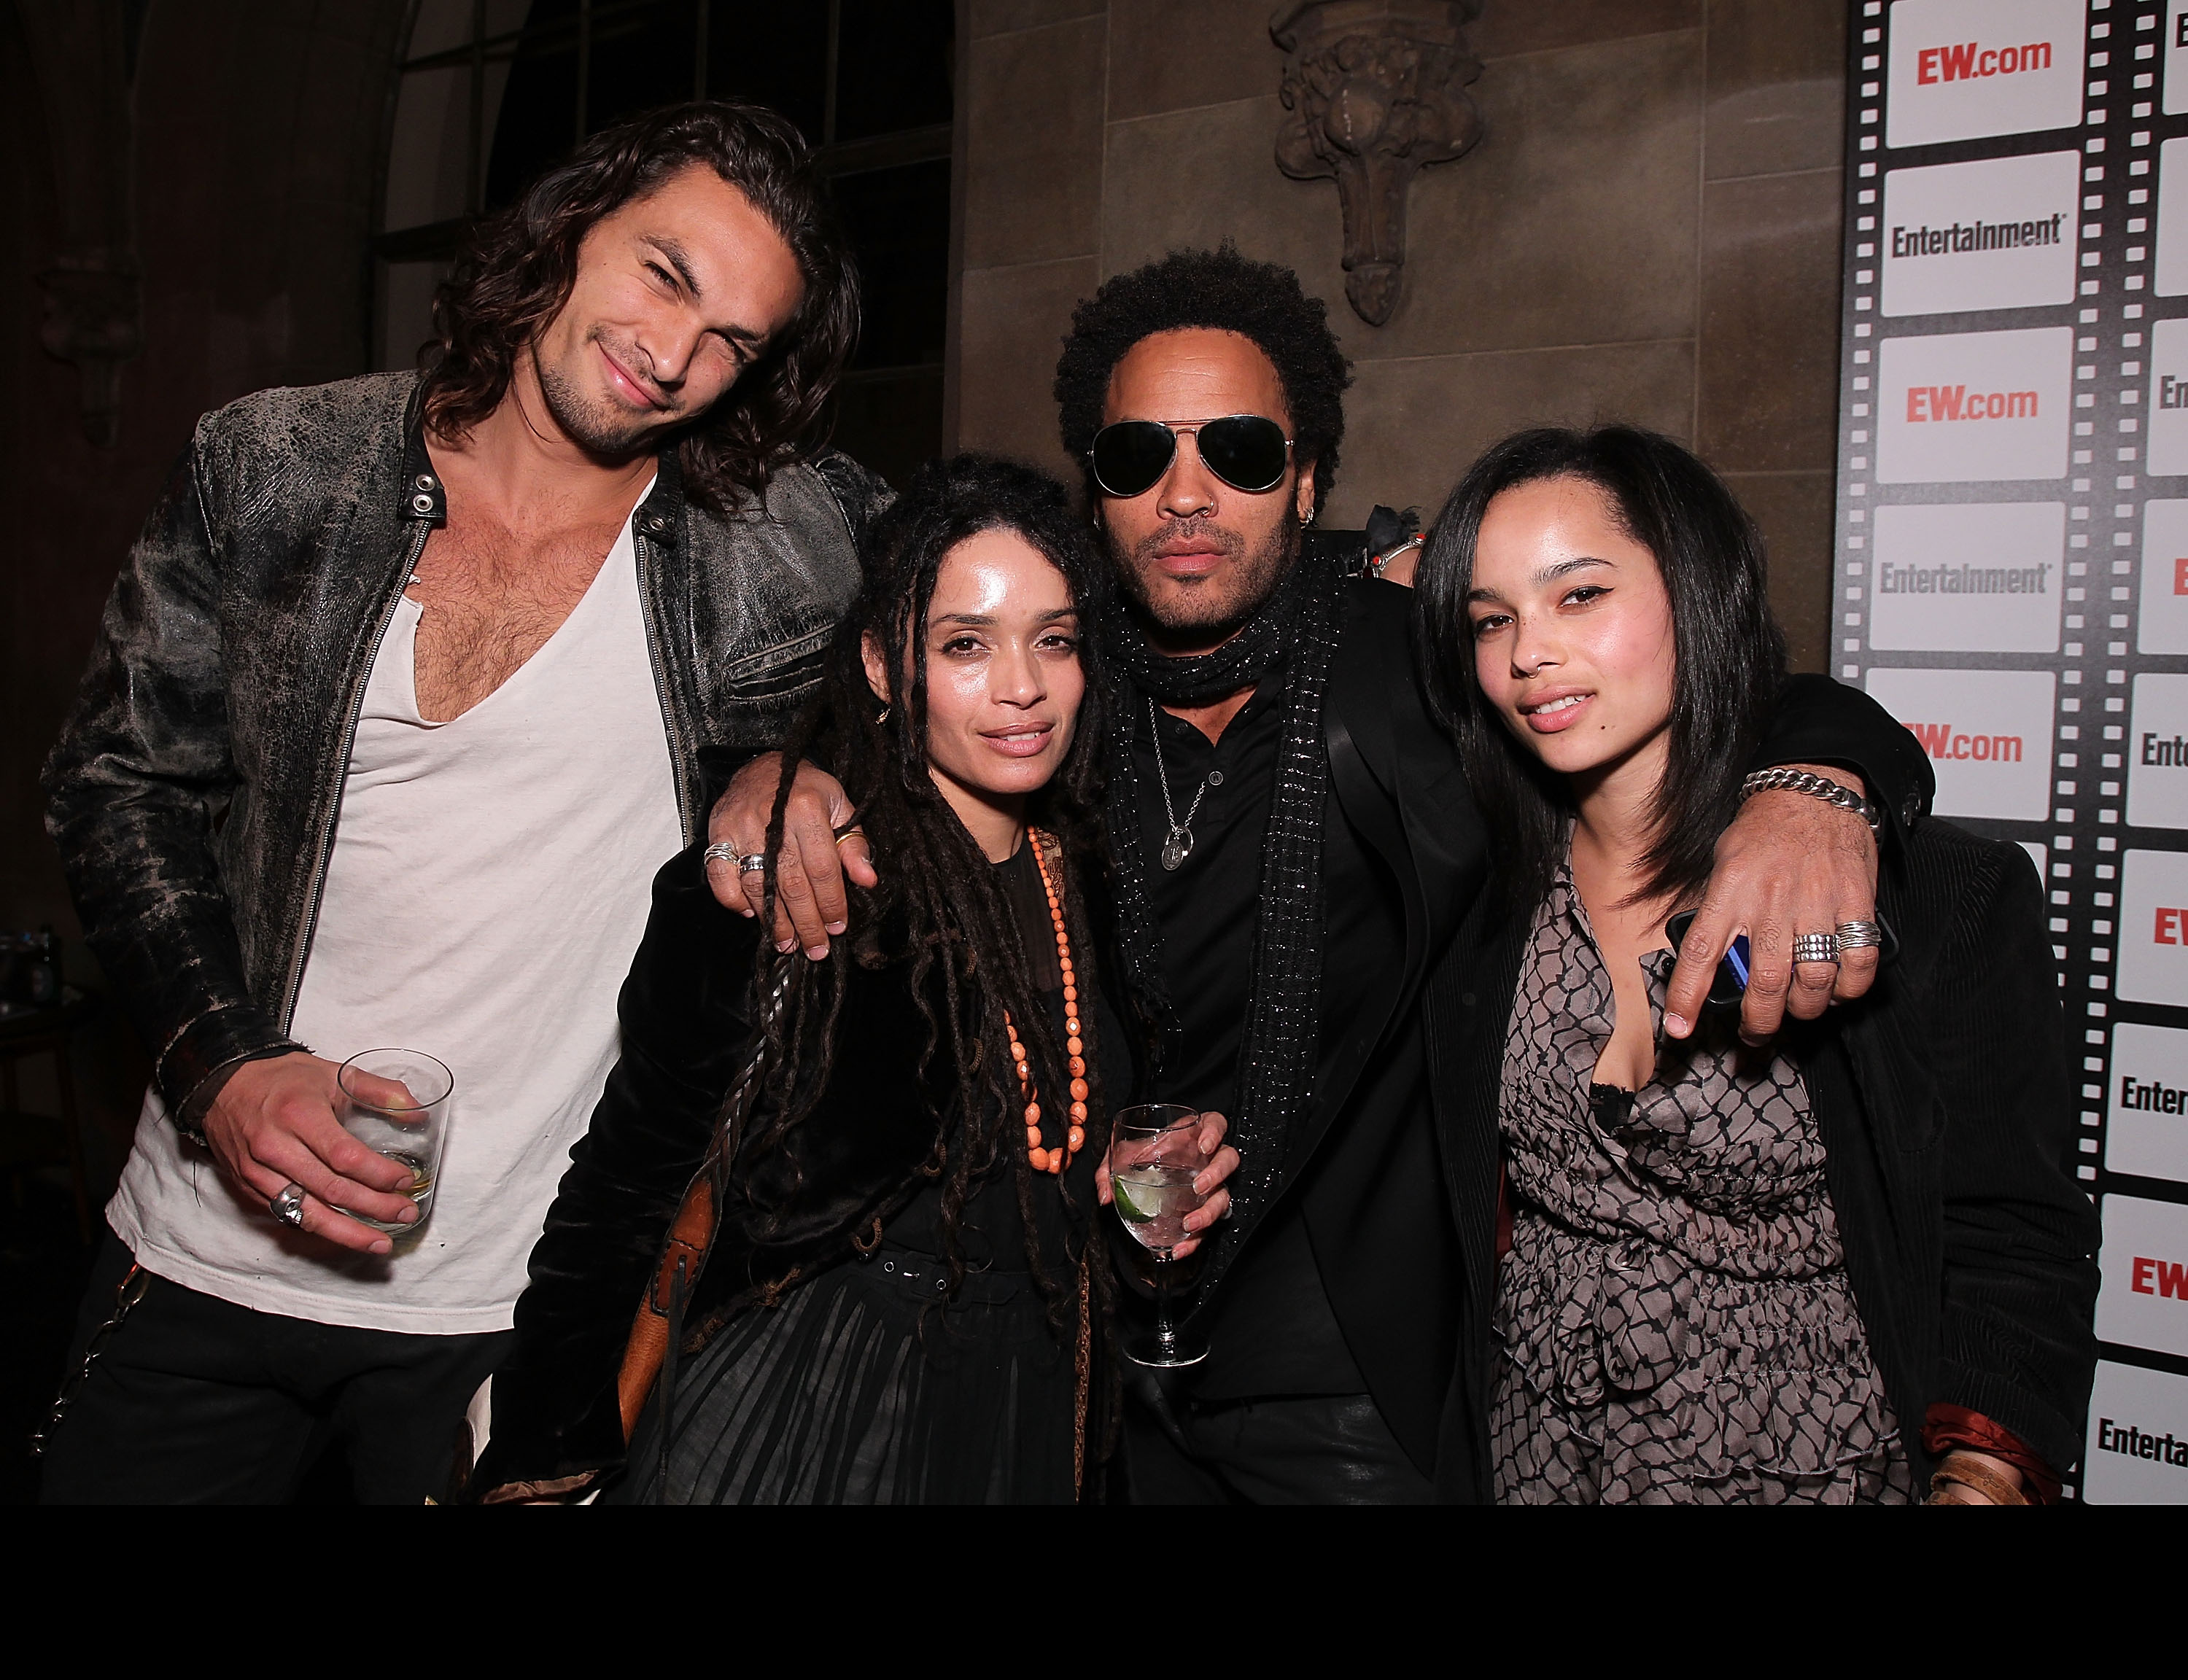 Jason Momoa, Lisa Bonet, and Lenny and Zoe Kravitz at Entertainment Weekly's party on February 25, 2010 in Los Angeles, California | Source: Getty Images